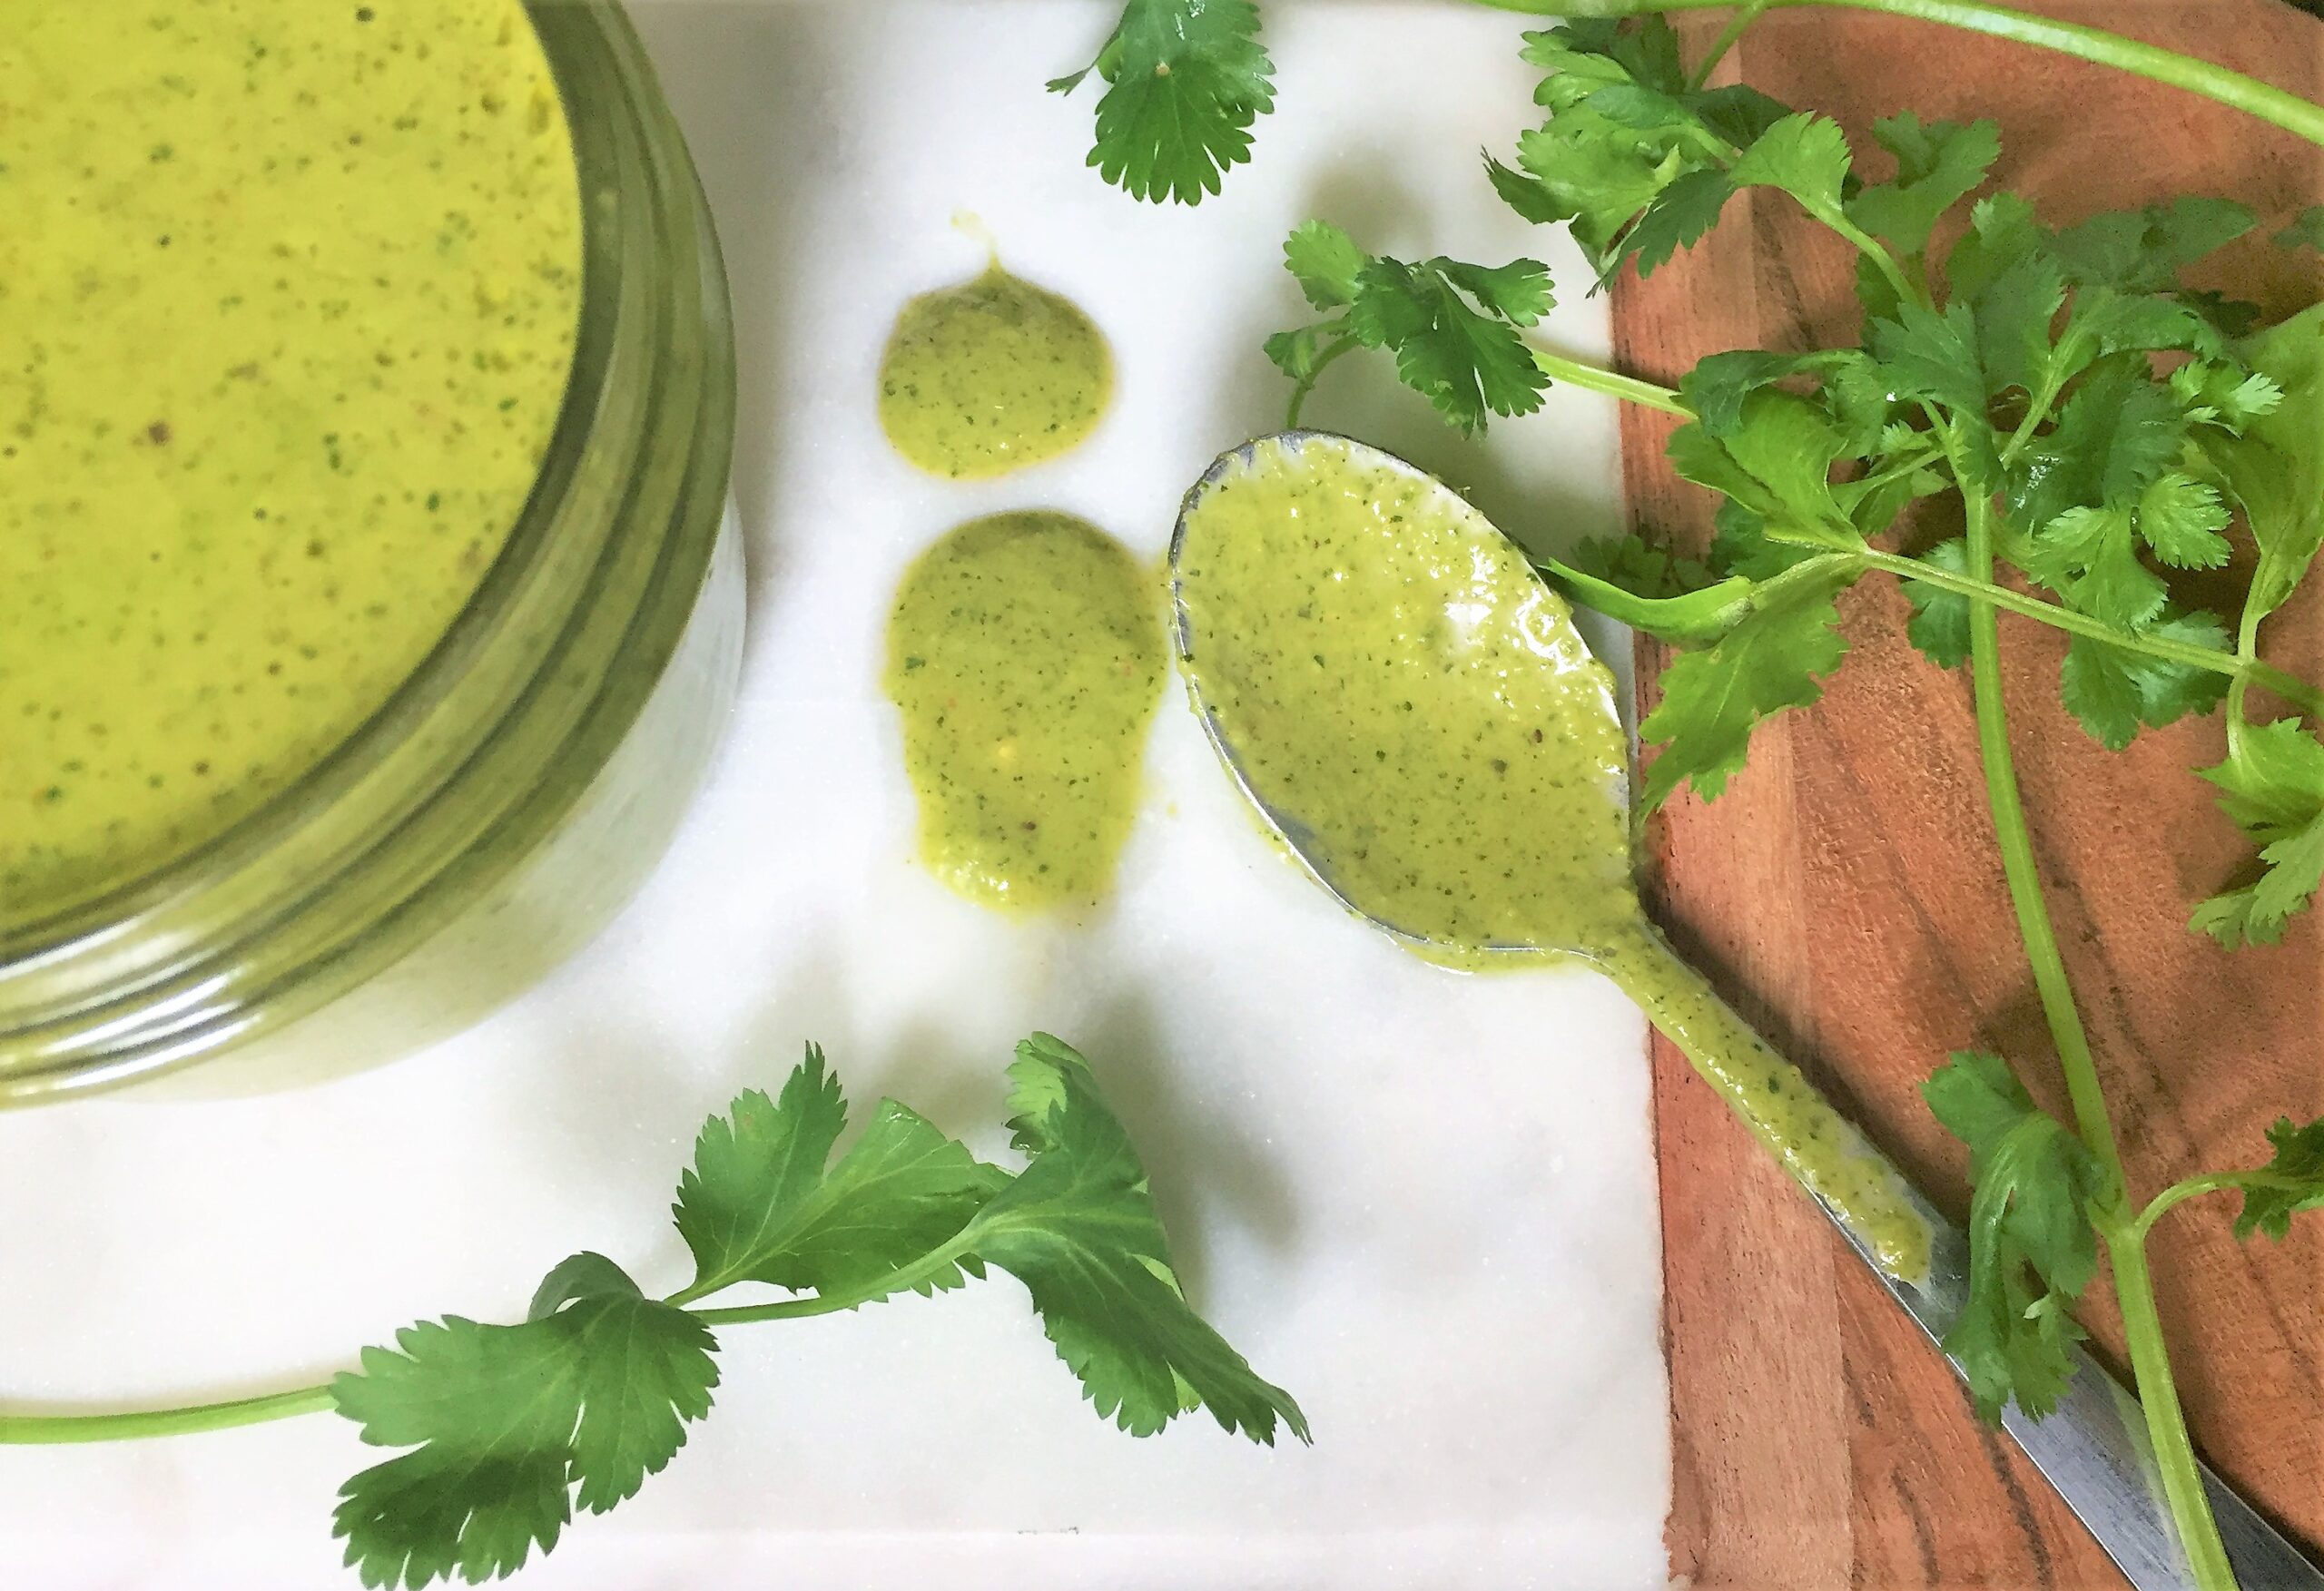 Quick and Easy Chimichurri Sauce Recipe courtesy of Vegan Fit Carter